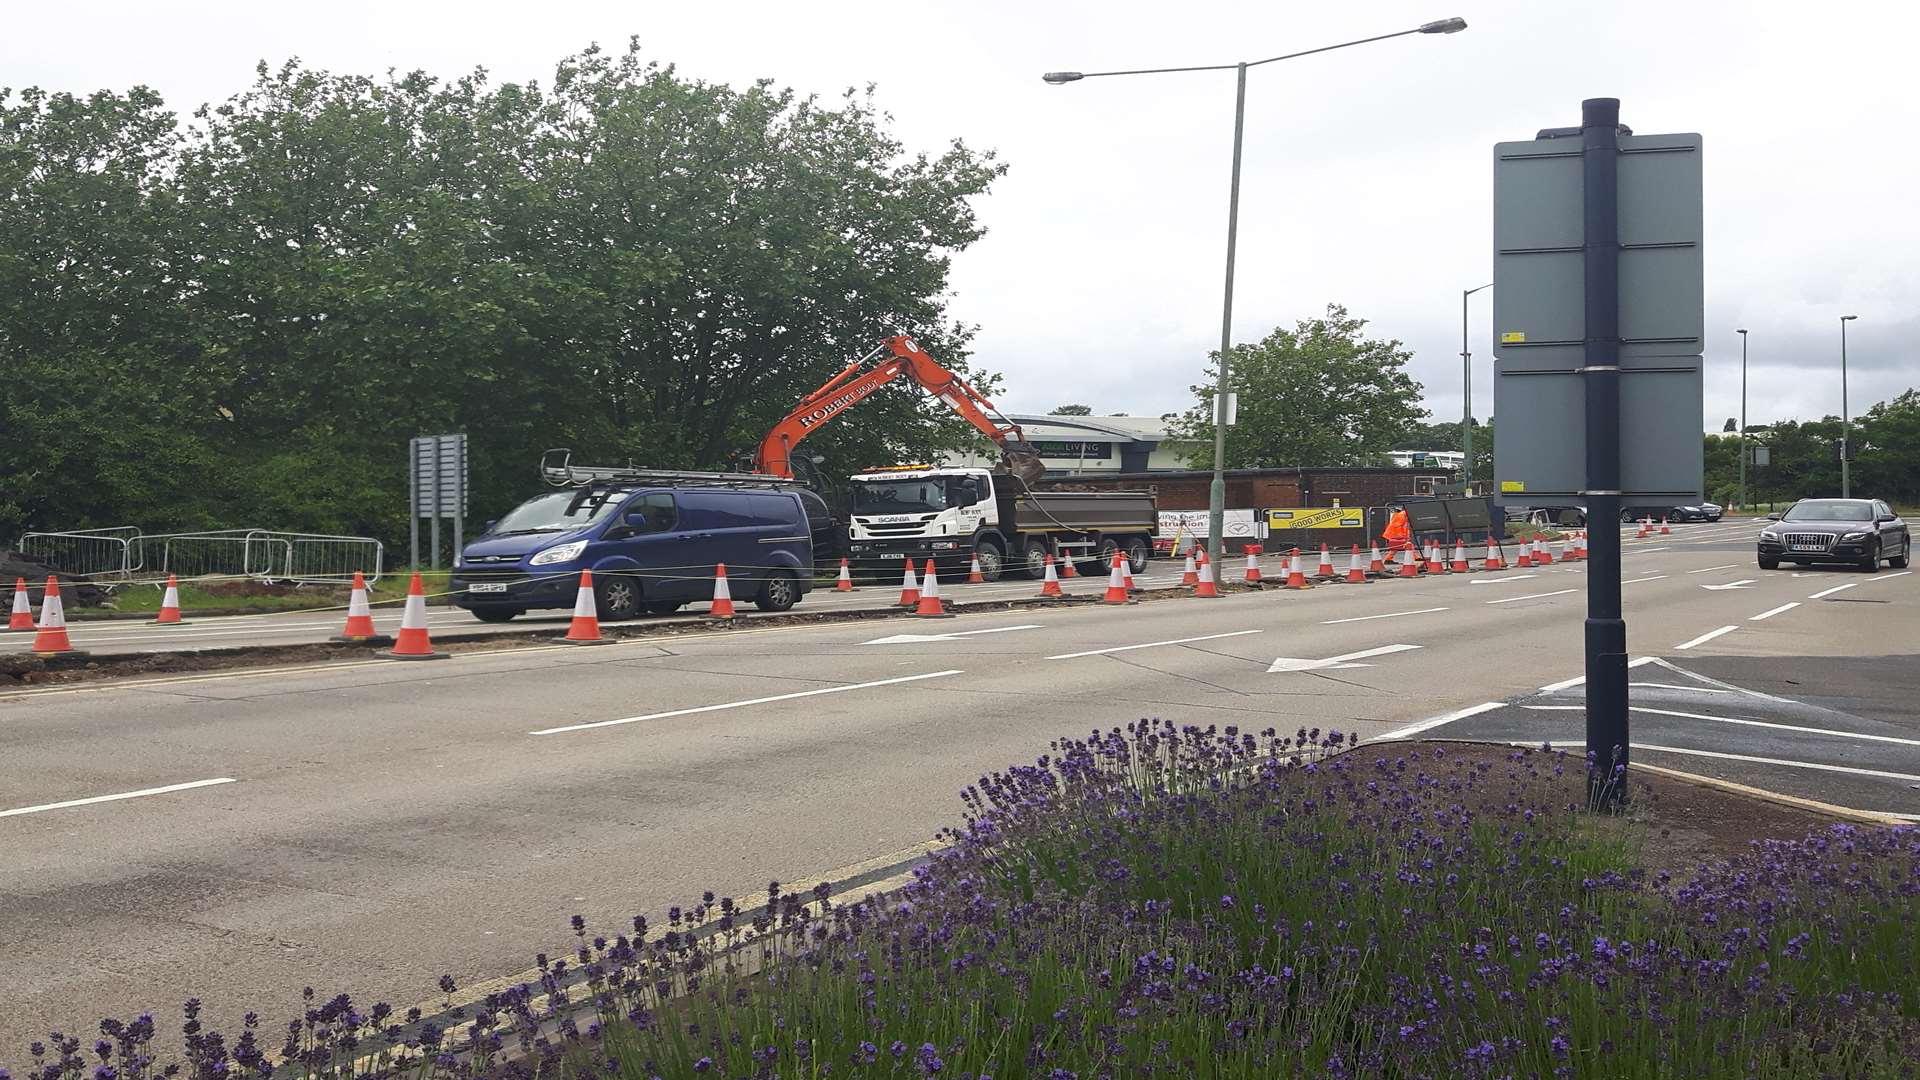 Work is continuing on the Maidstone Bridges system